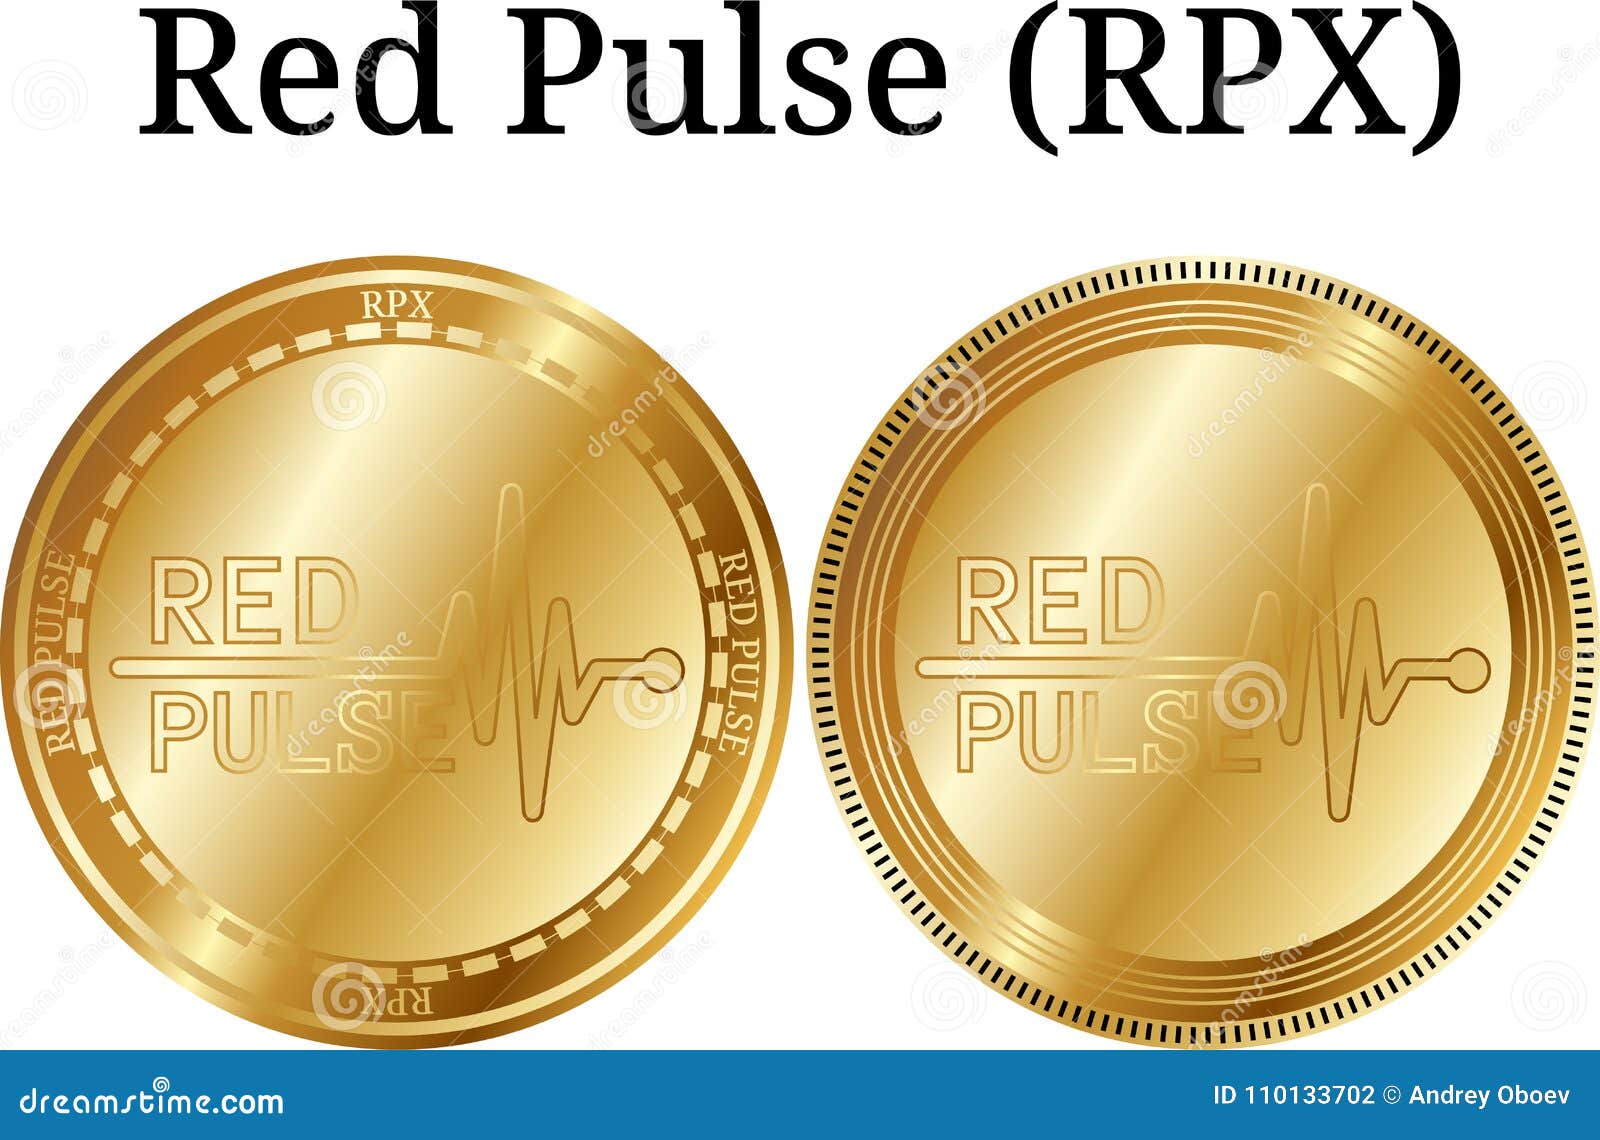 Set of Physical Golden Coin Red Pulse RPX Stock Vector Illustration of investment, fintech: 110133702